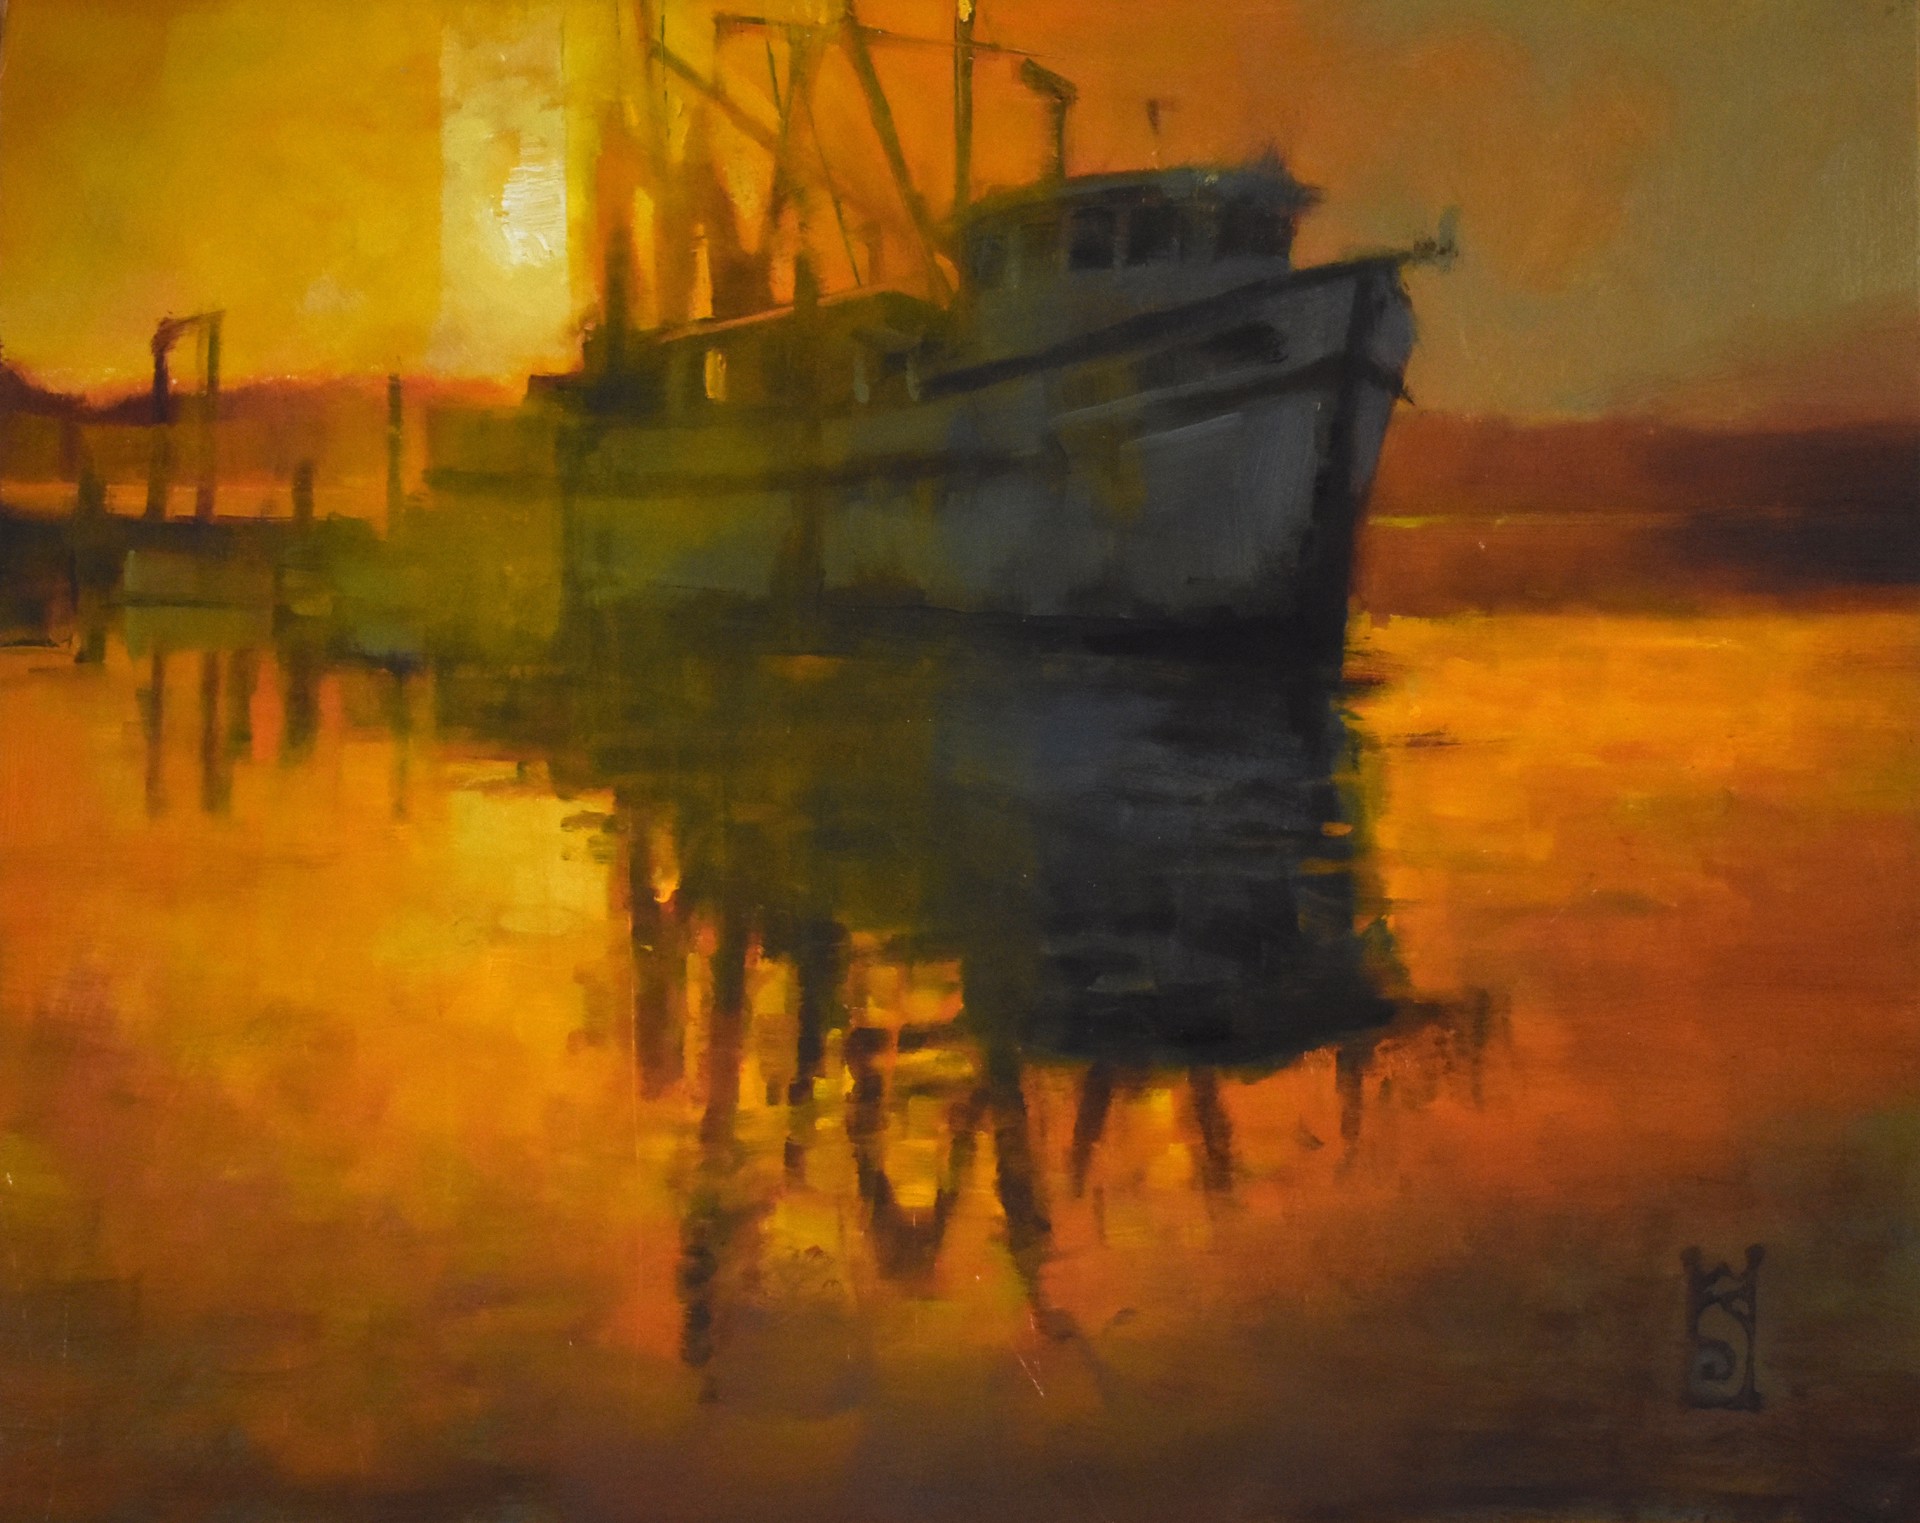 "Clocking Out" original oil painting by Steven Walker